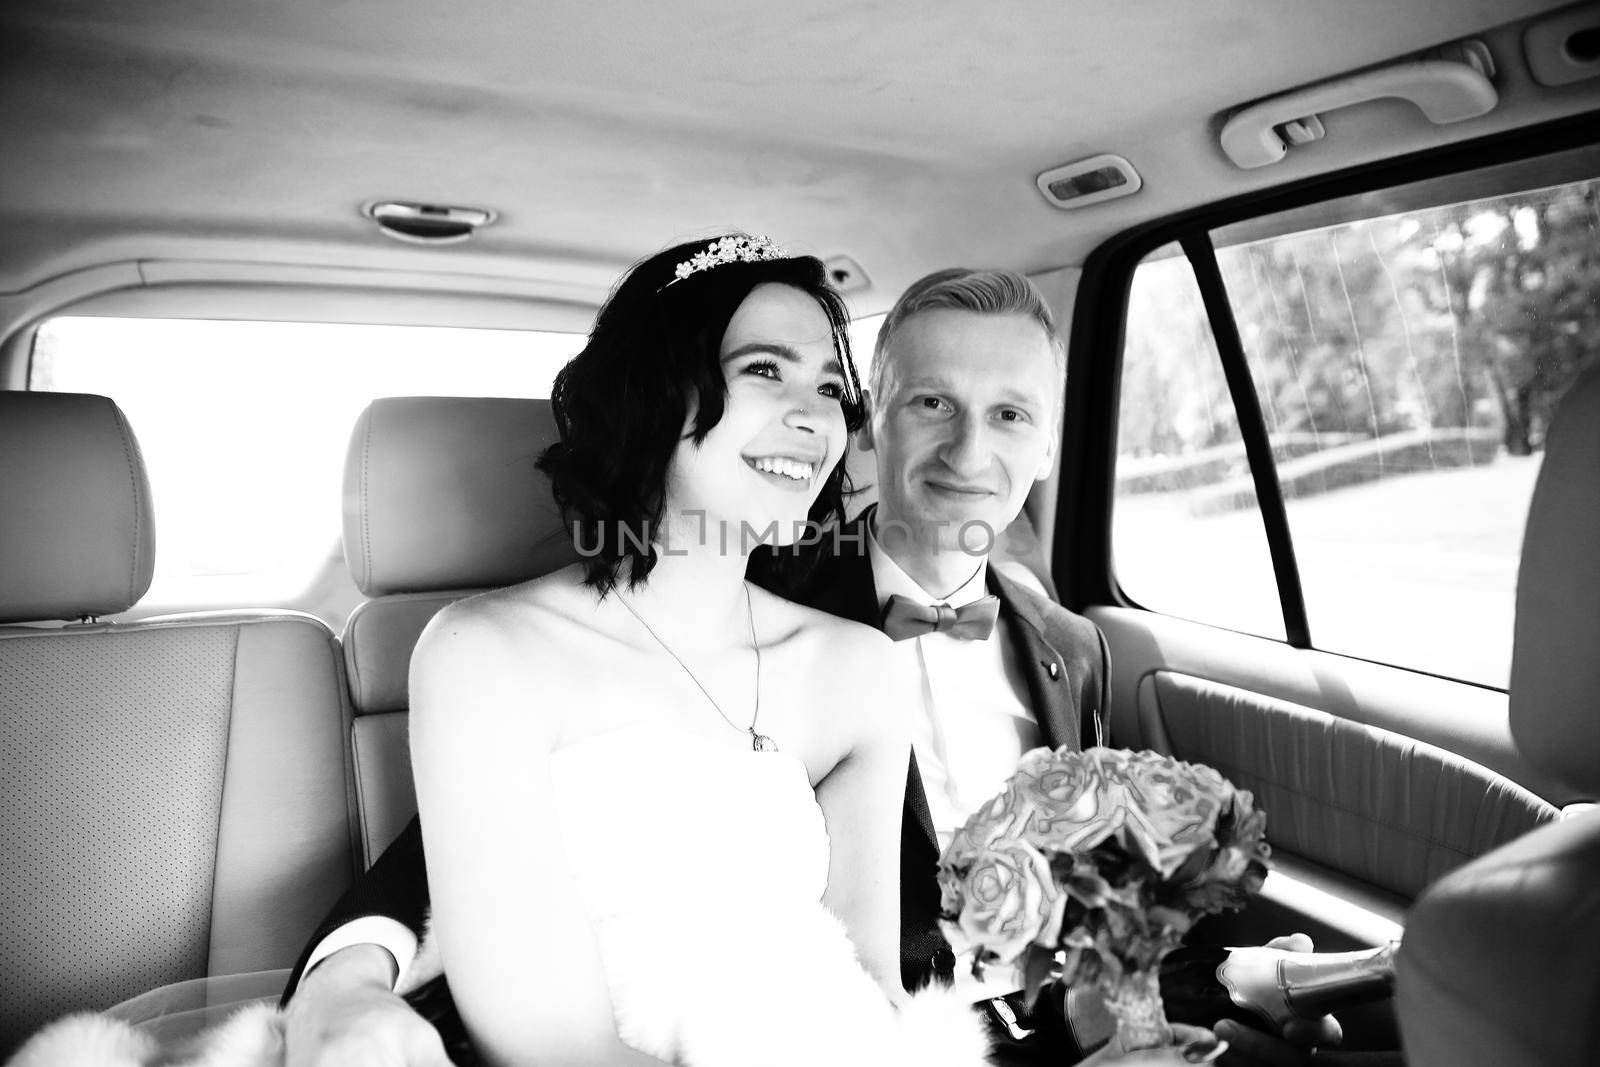 photo in retro style .the couple sitting in the wedding car.